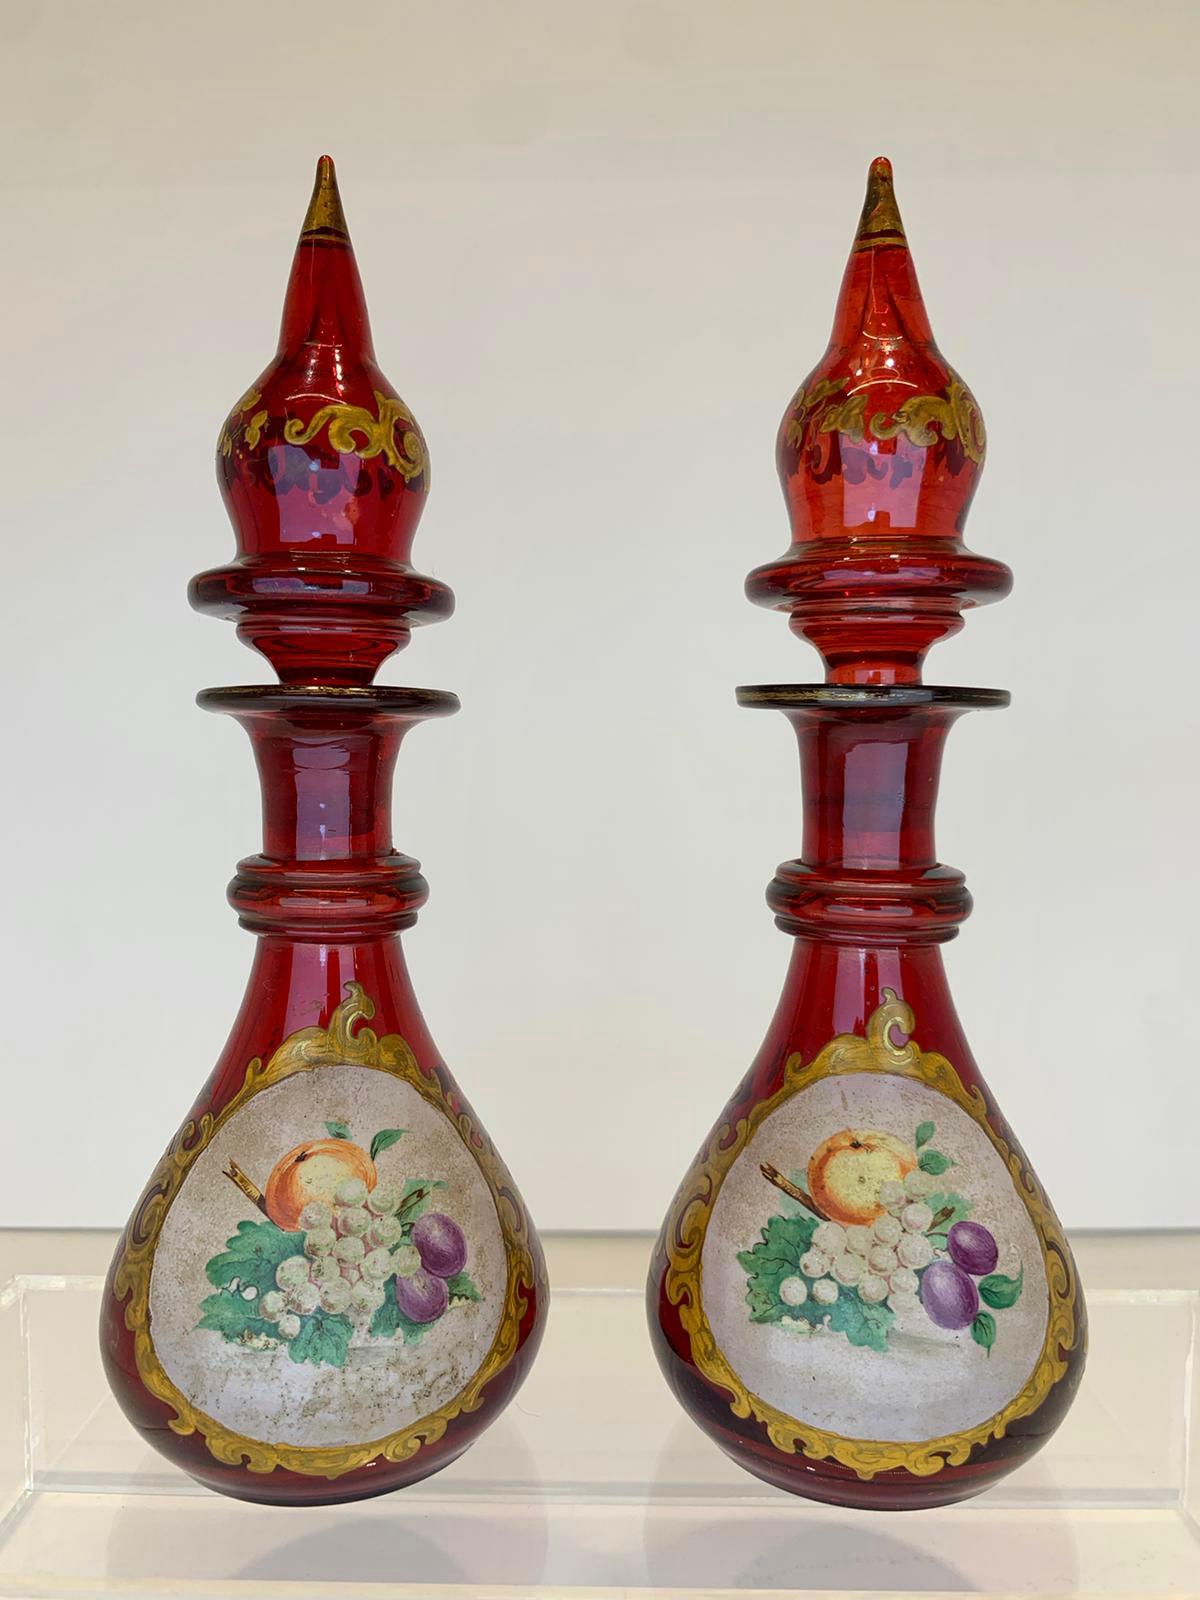 Bohemian blown glass perfume bottles and stoppers in ruby red color
decorated with gilded enamelled decoration
opaque glass overlay hand-painted with colorful fruit
Bohemia, 19th century.